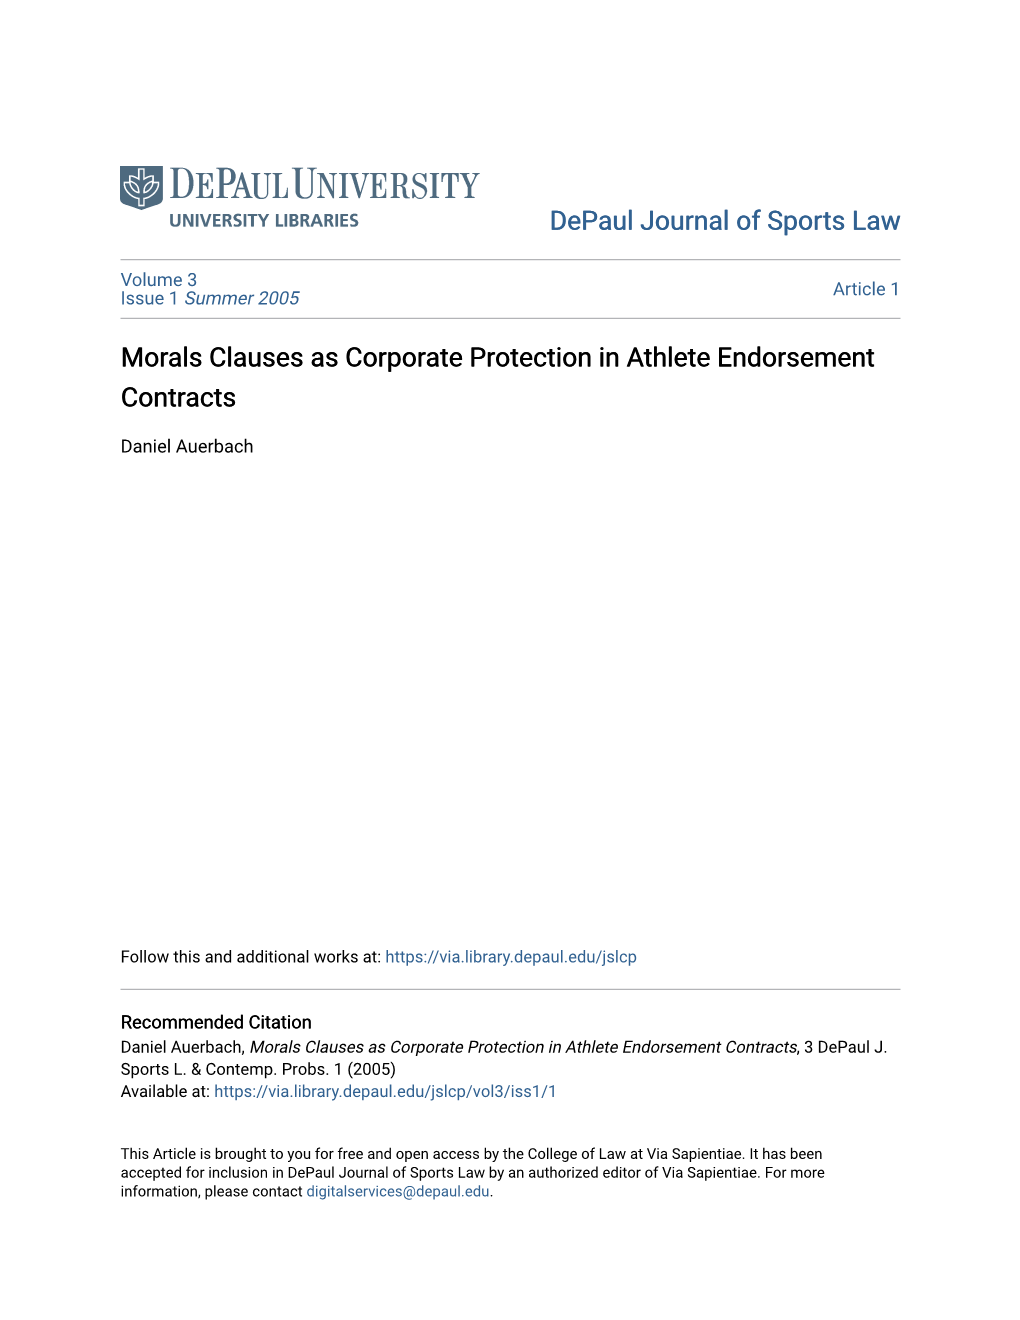 Morals Clauses As Corporate Protection in Athlete Endorsement Contracts